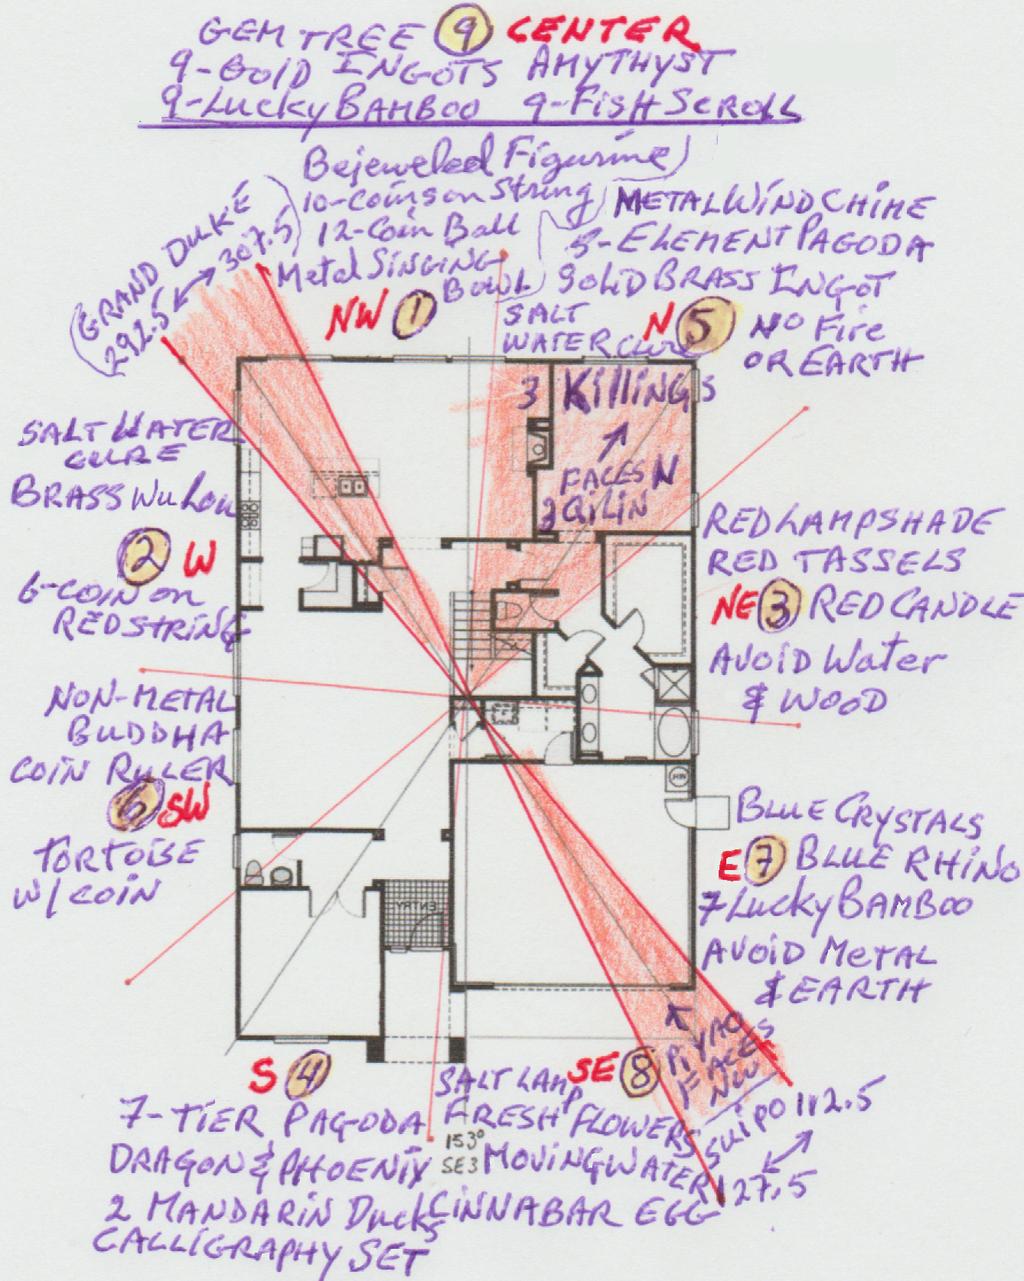 4 Work With Your Floor Plan and Use an Accurate Compass As you read through the following recommendations, it may be easier to do so with an accurate floor plan of your home or office in front of you.